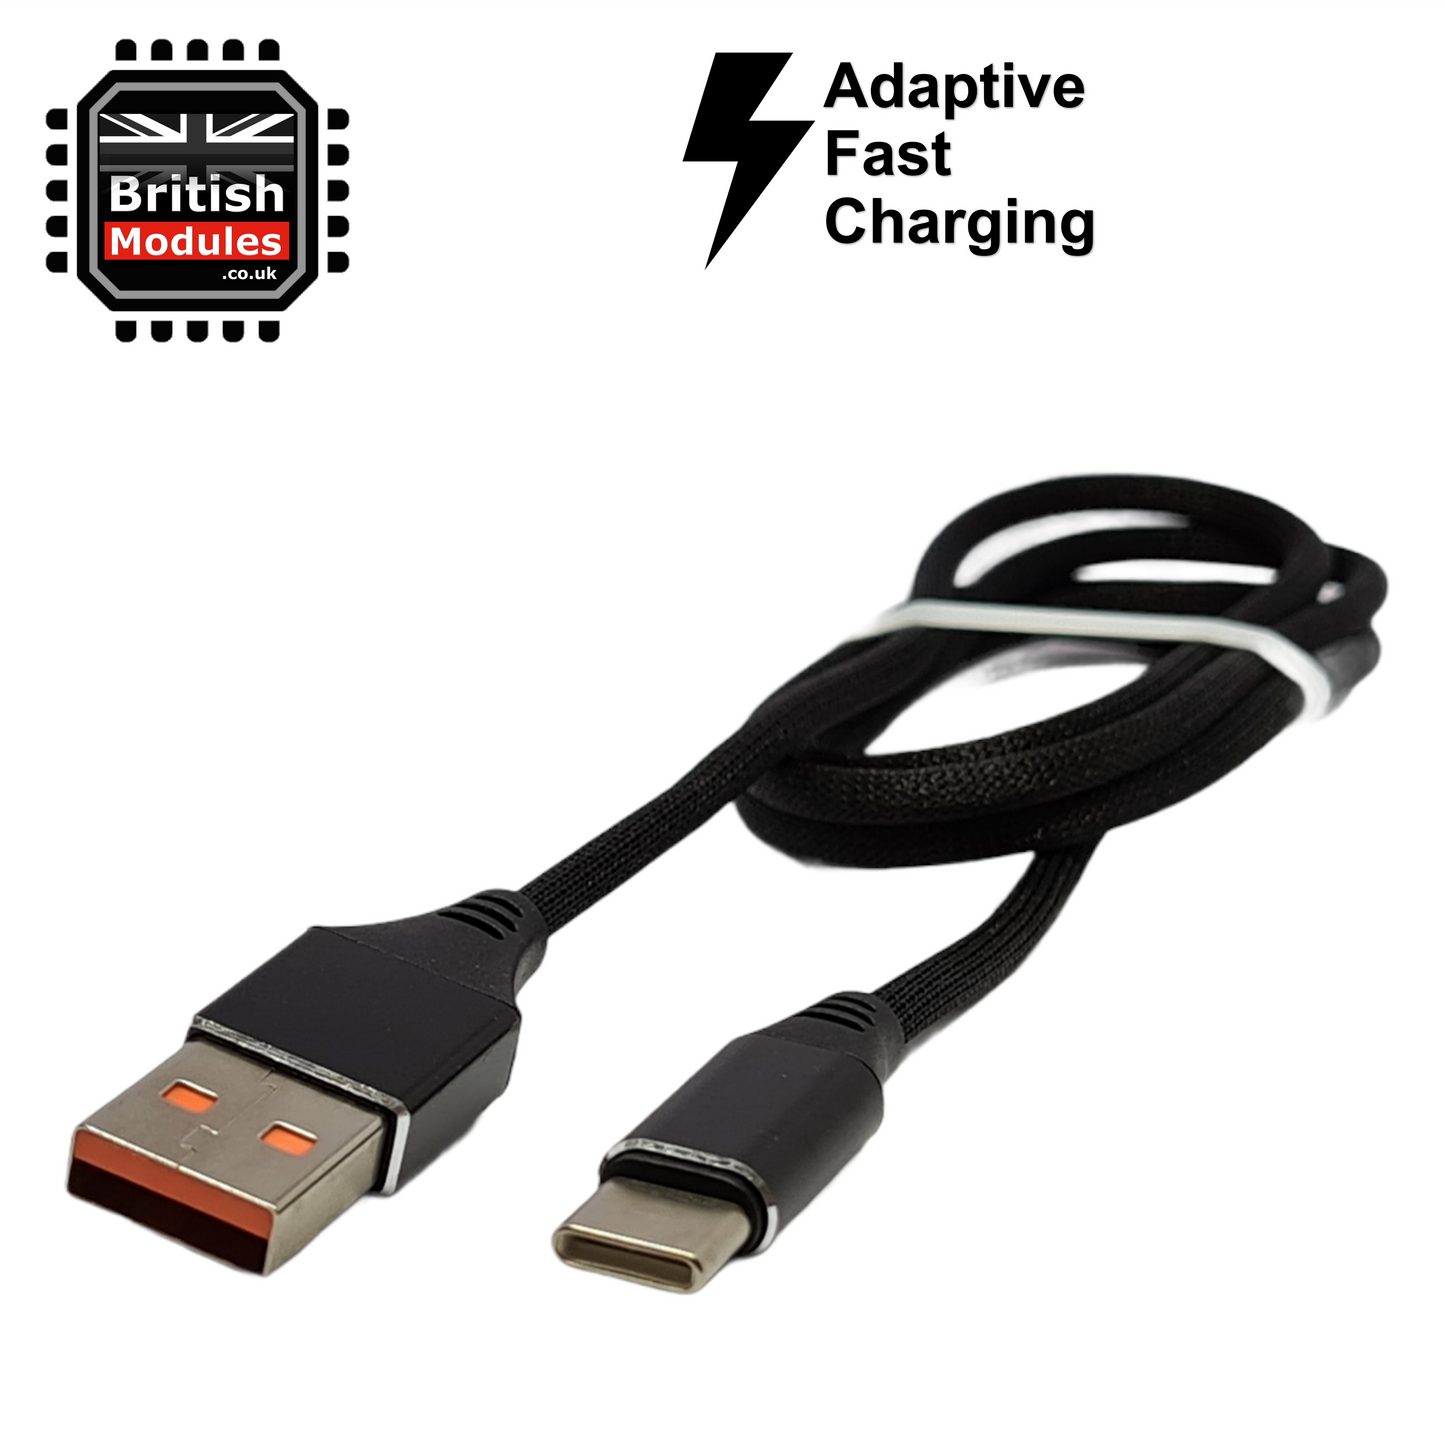 Premium Braided USB-C Type C Charging Cable Adaptive Fast Phone Charger Lead by VidVie